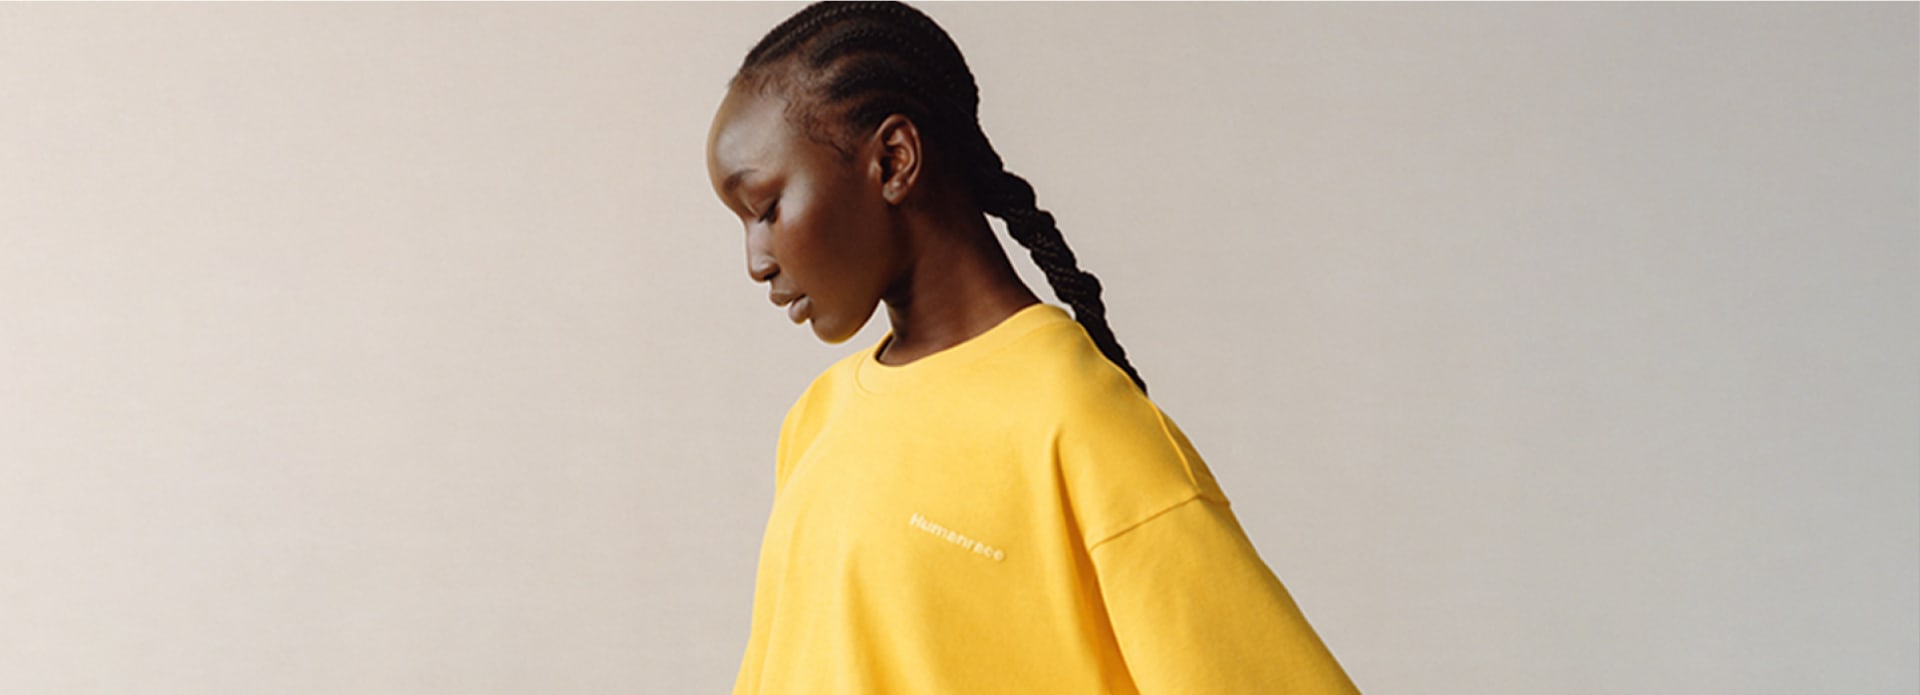 Woman wearing a yellow sweatshirt from the Pharrell Williams Premium Basics collection